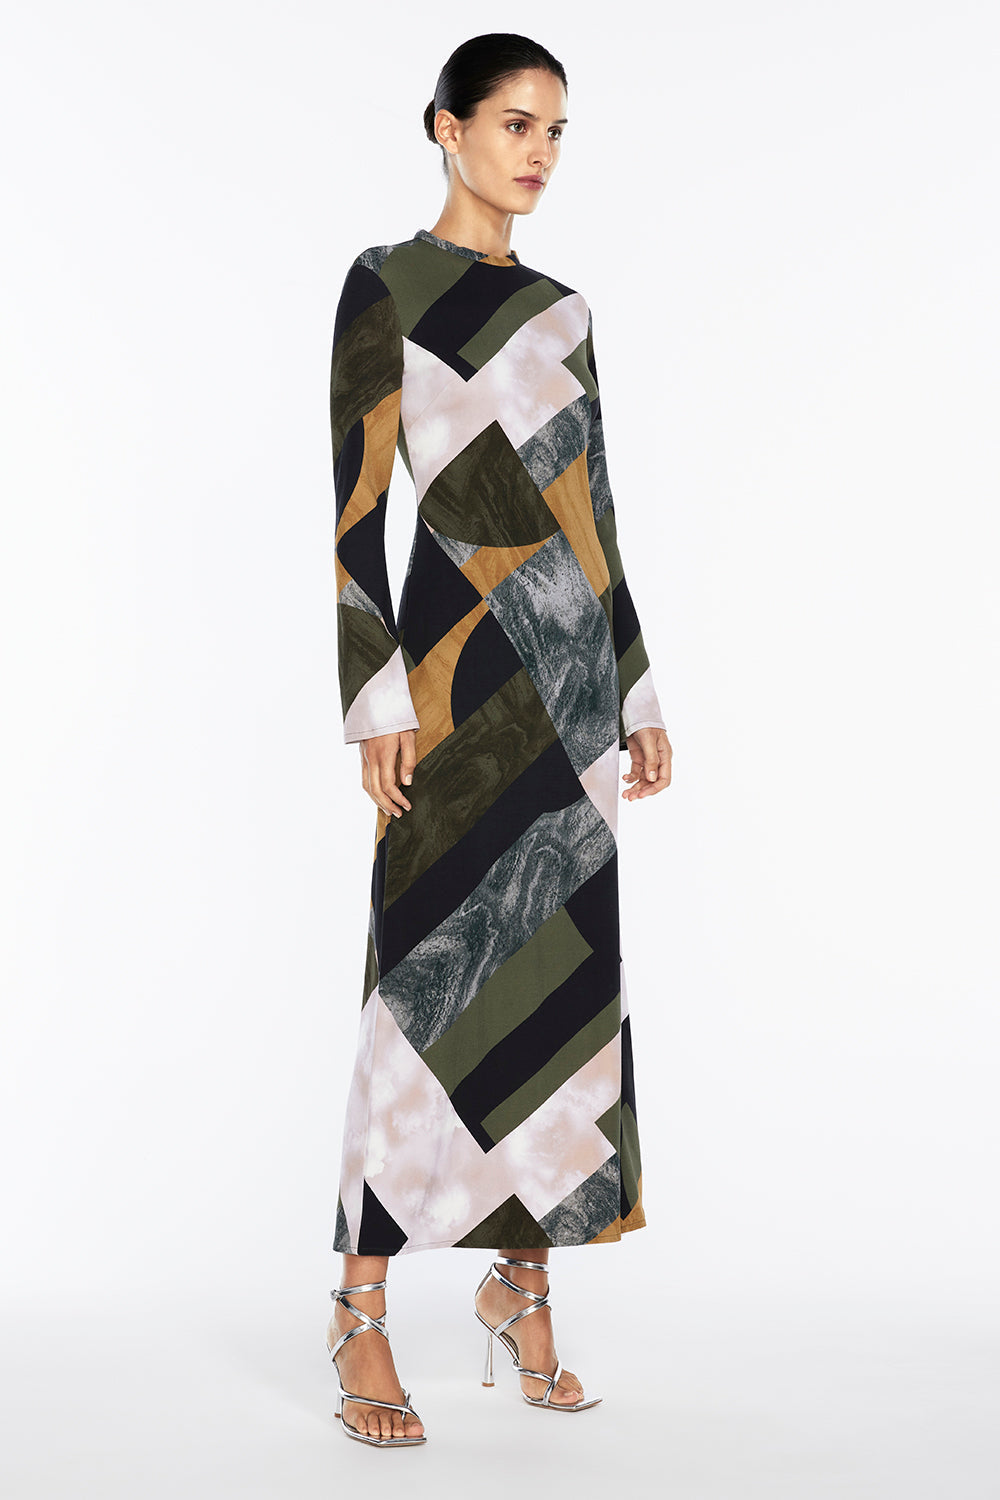 ABSTRACT COLLAGE L/S DRESS